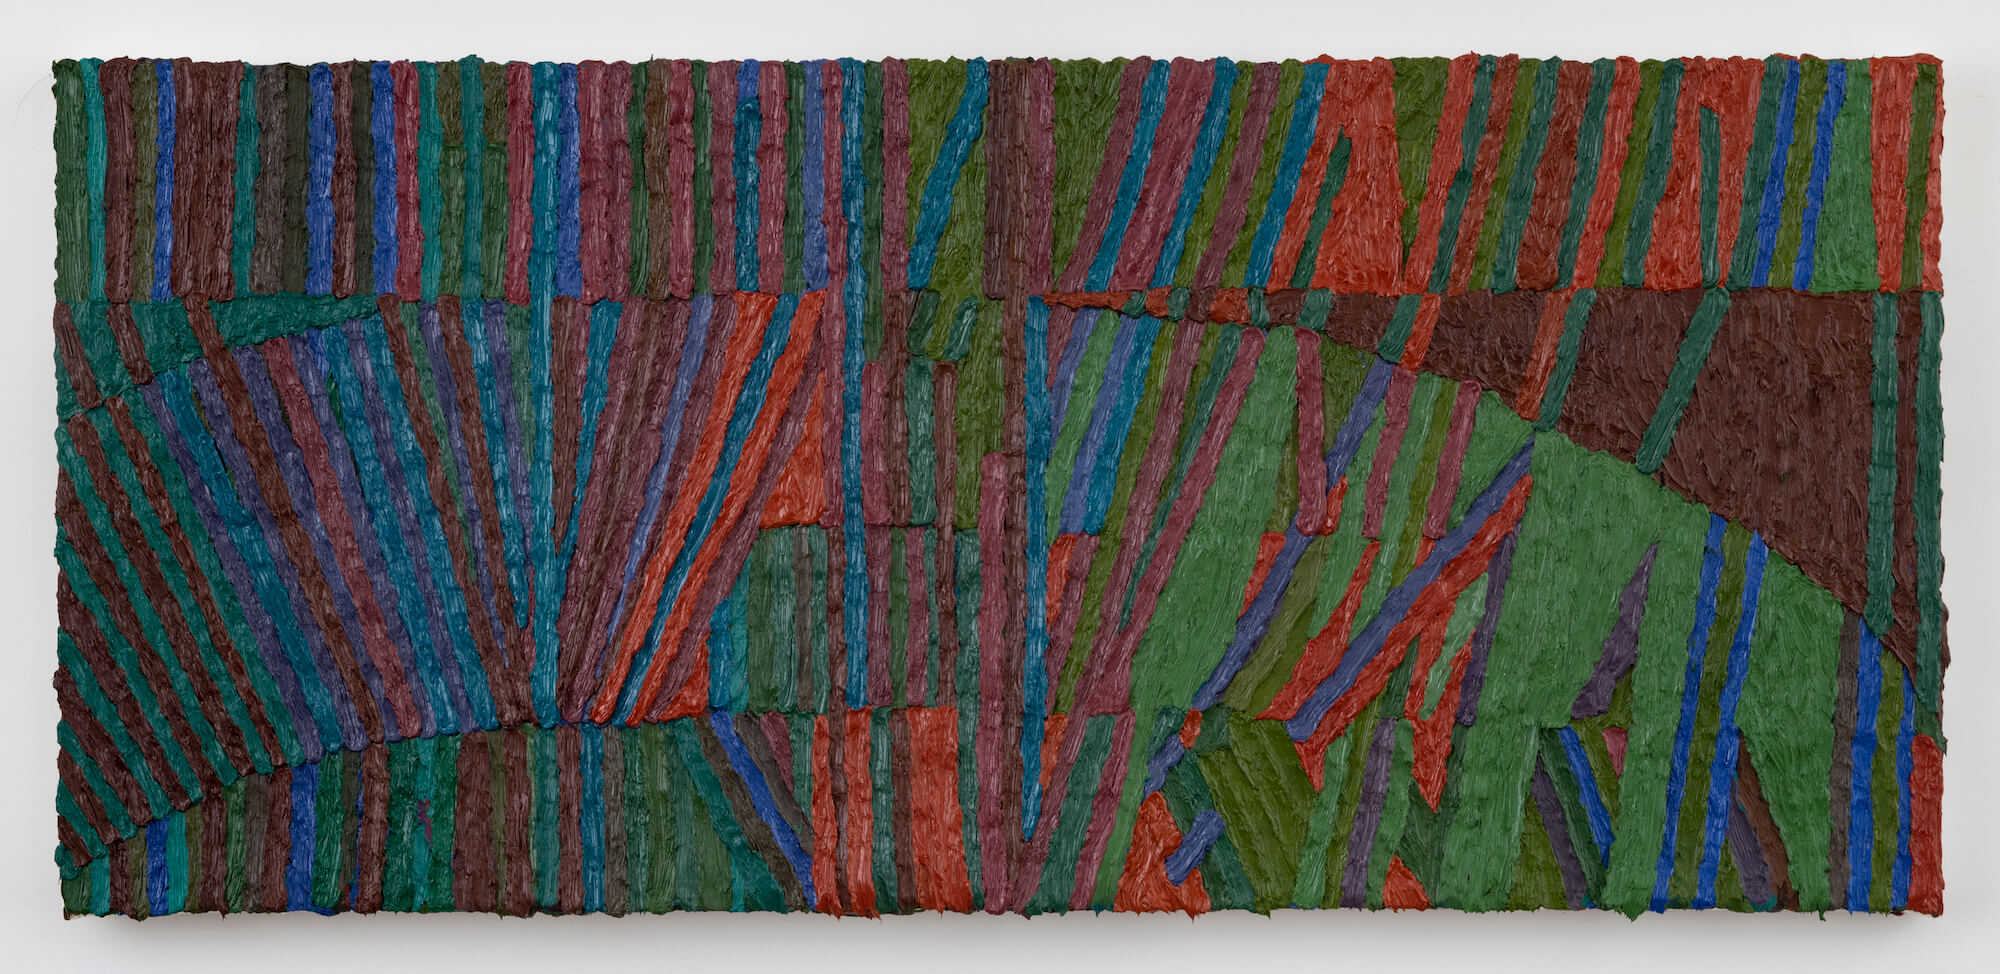 painting: Brett Baker, Window with palm, oil on canvas, 16 x 36 inches, 2018-2019